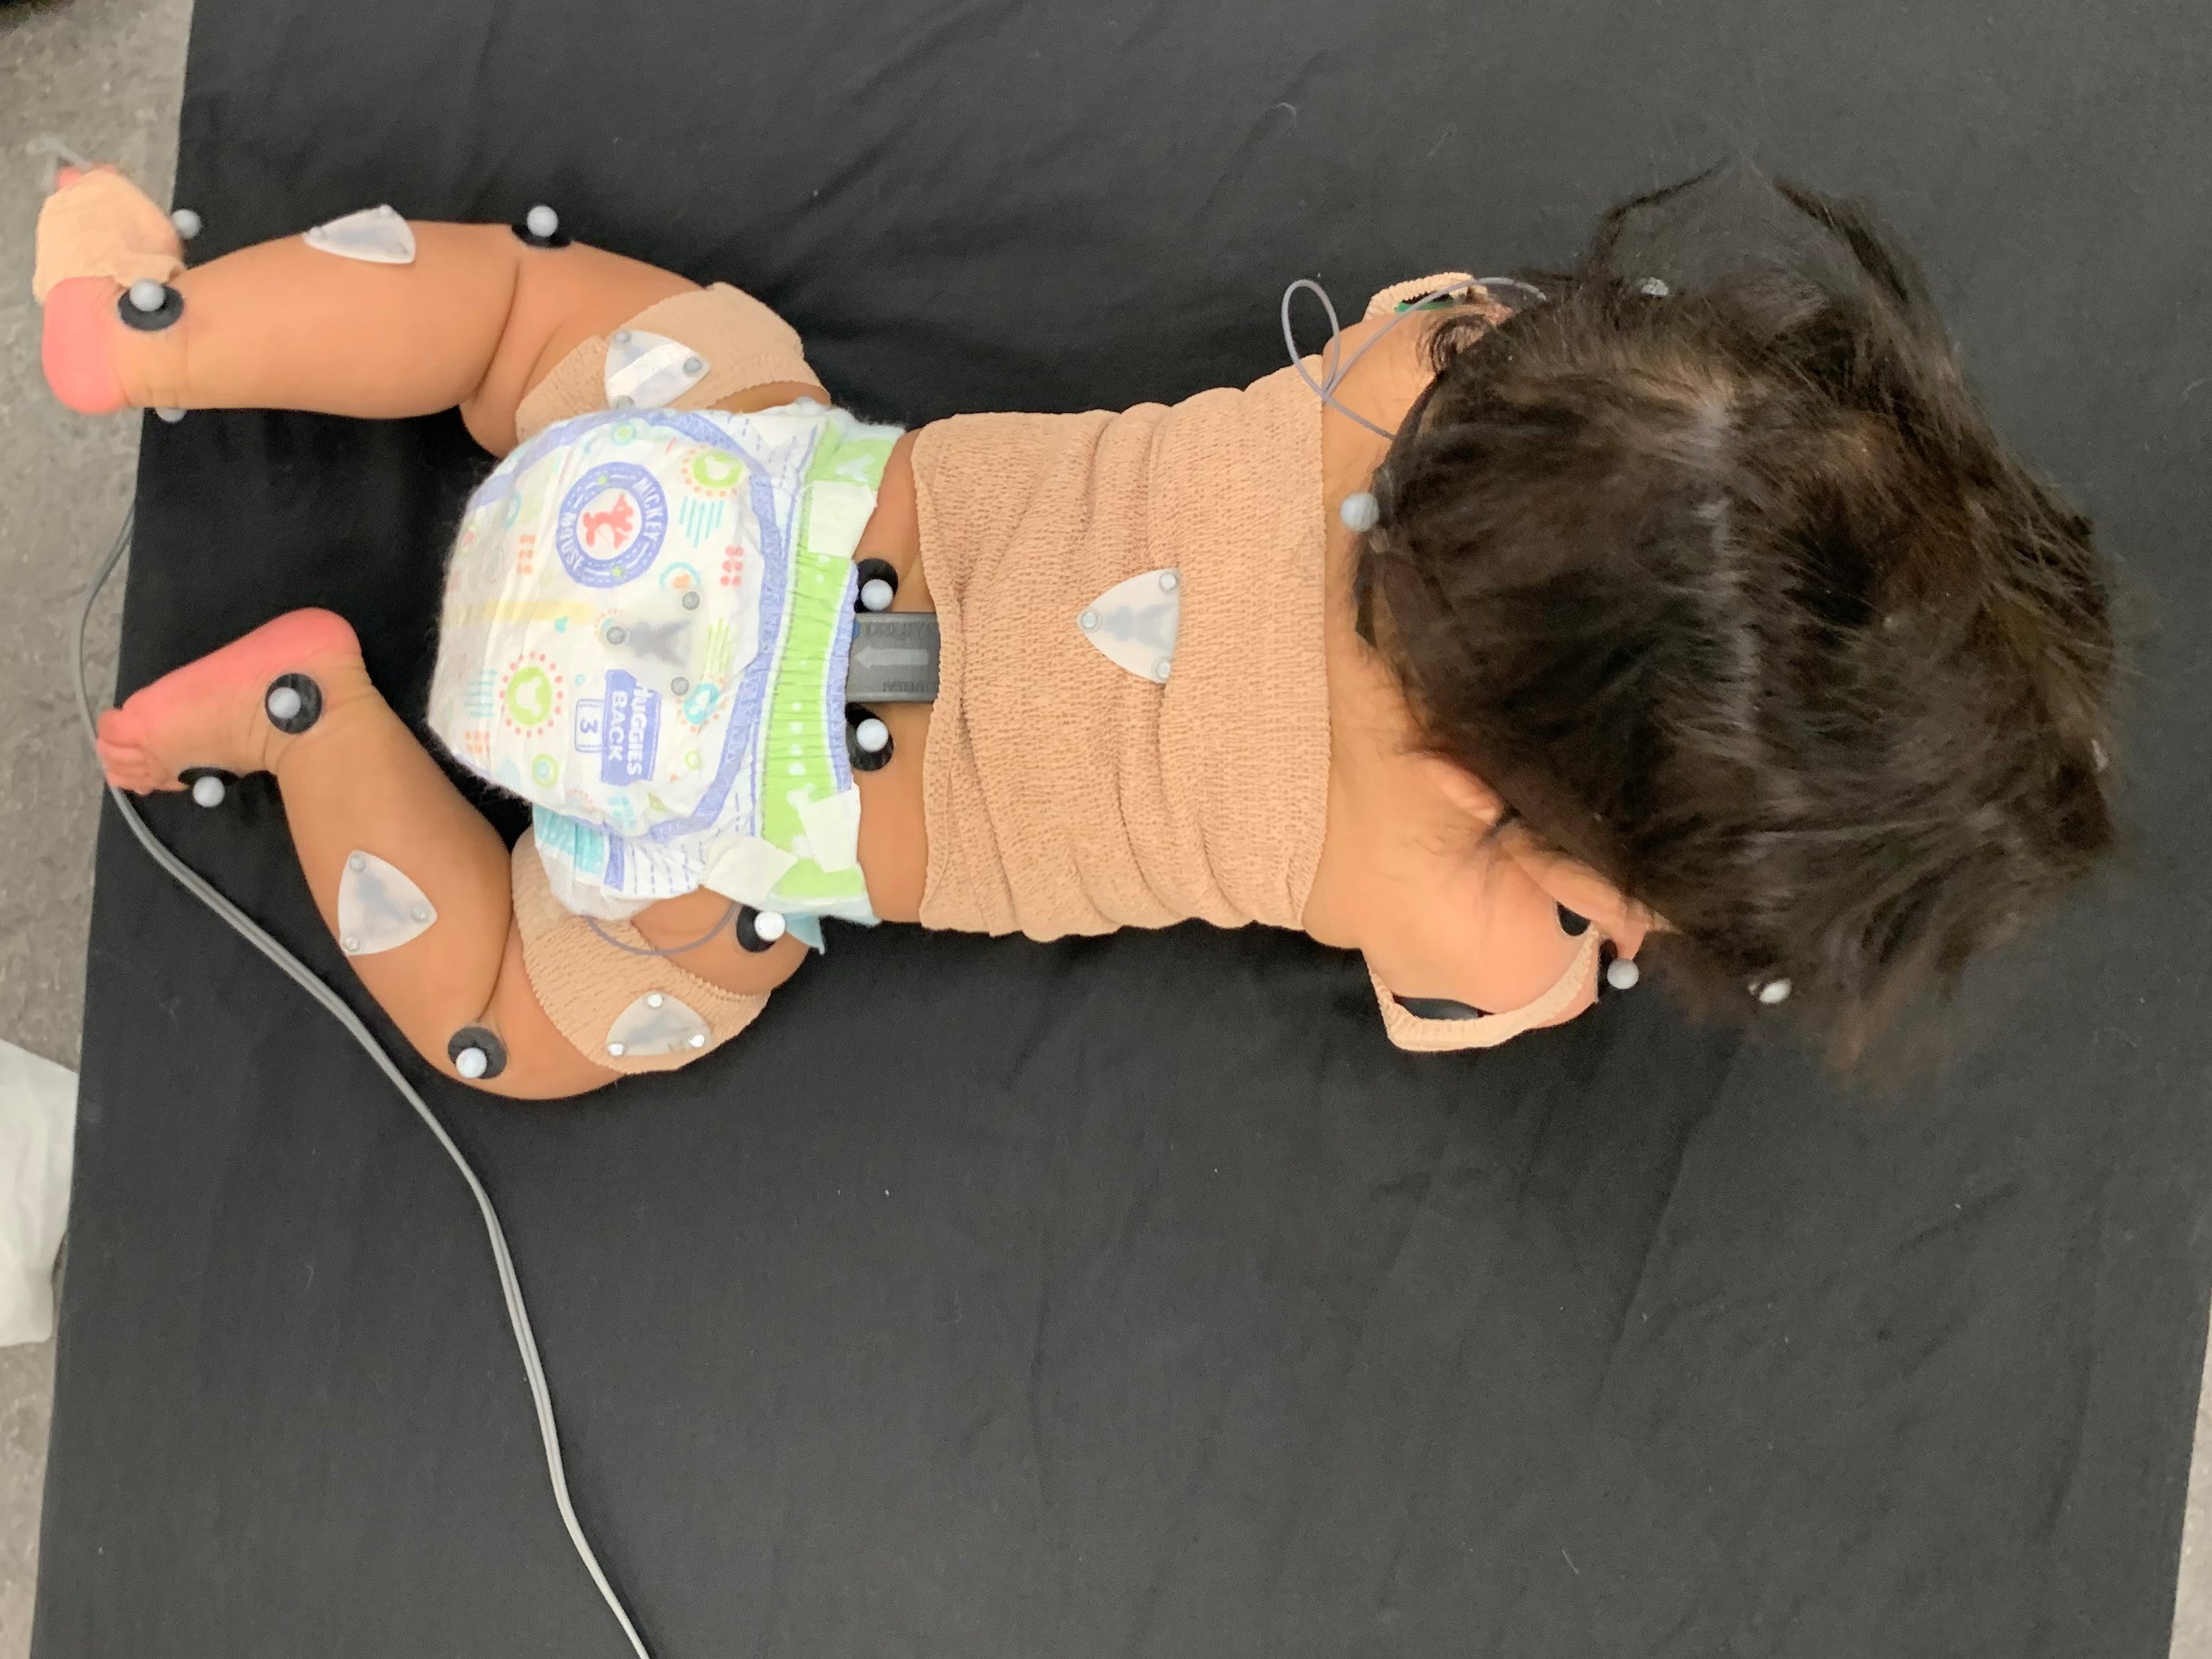 Baby on stomach hooked up to monitors